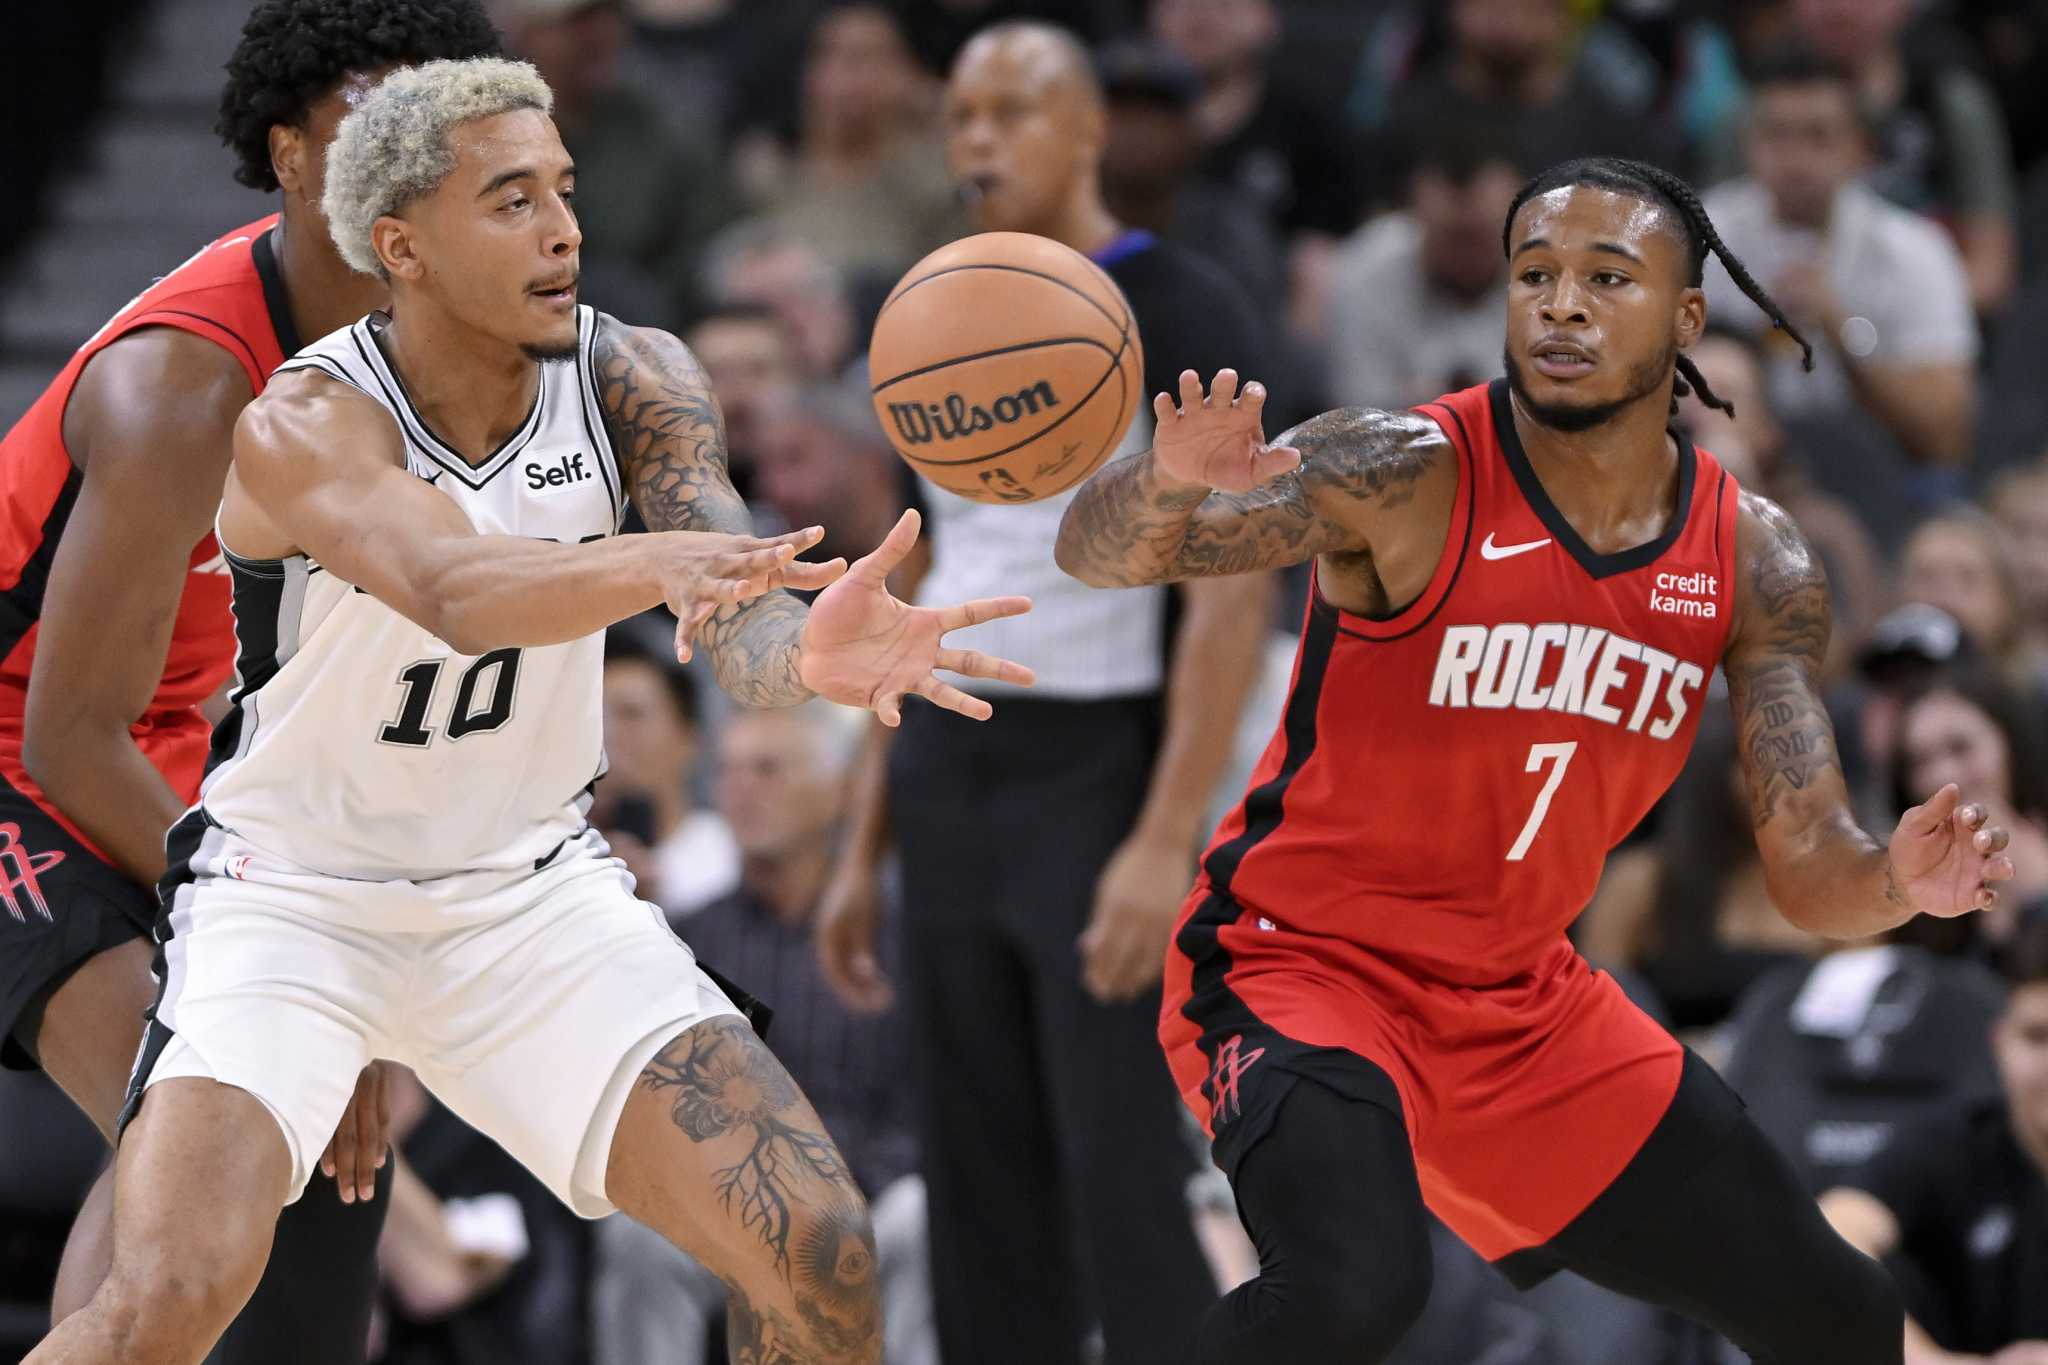 Rockets rally to top Spurs, who sat Wembanyama - The San Diego